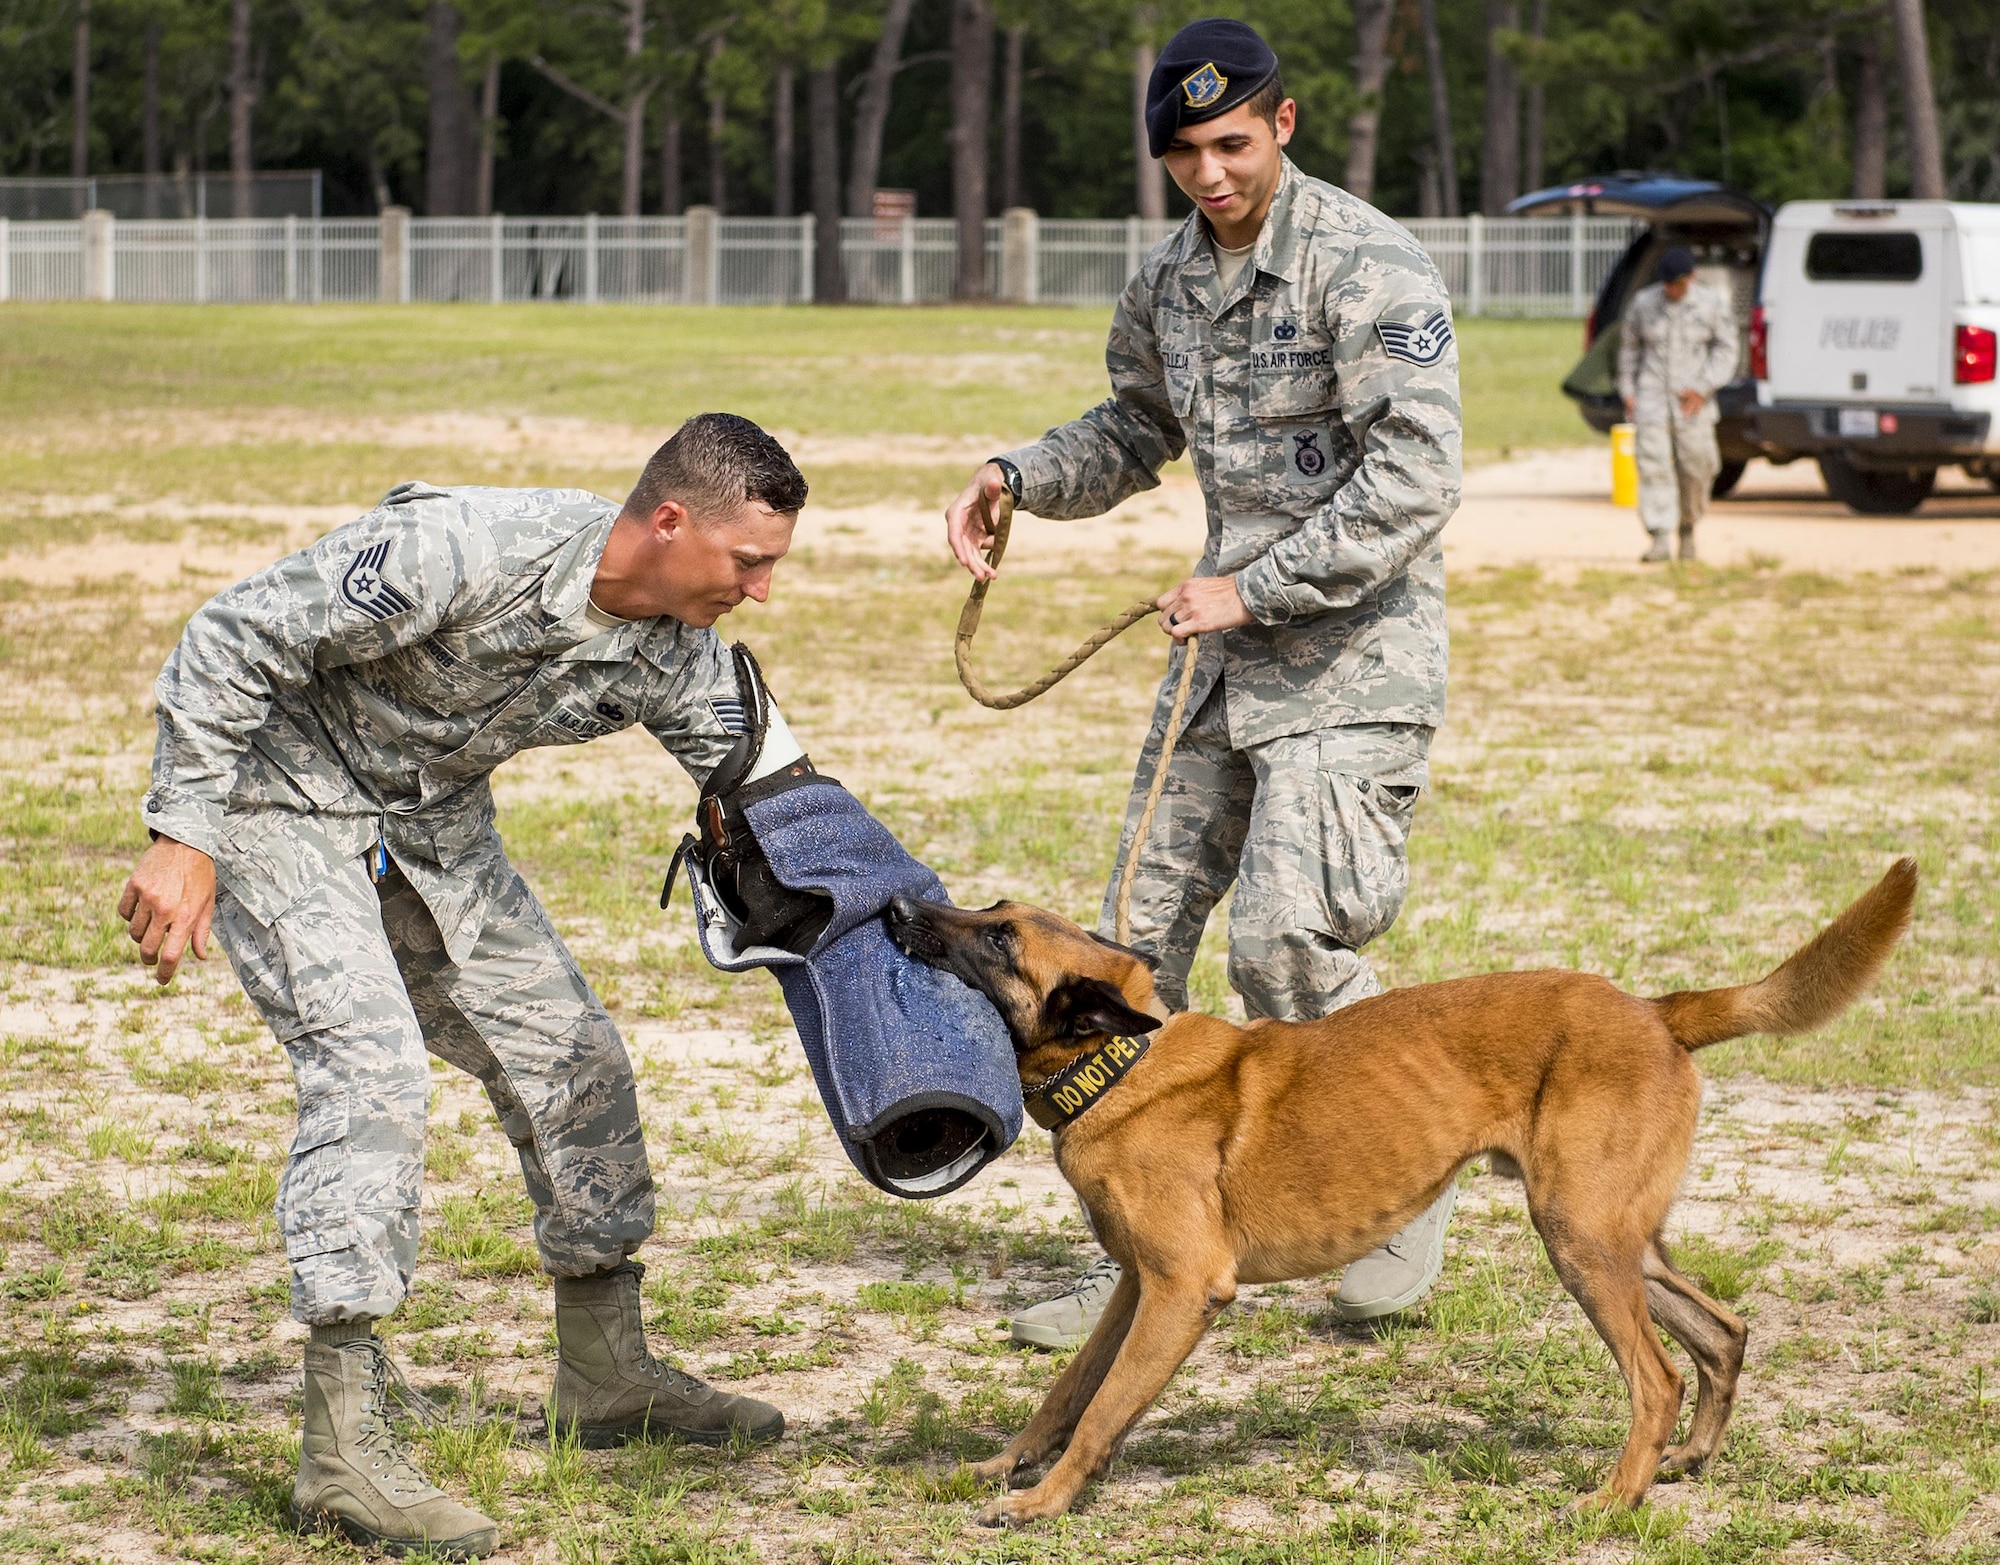 Military Working Dog Arko, 96th Security Forces Squadron, takes a bite out of Eglin Elementary School’s resource officer, Staff Sgt. Justin Hogg during a demonstration for Eglin Elementary School kids May 18 at Eglin Air Force Base, Fla. The event was in celebration of National Police Week. More than 100 children watched the demonstration. (U.S. Air Force photo/Samuel King Jr.)